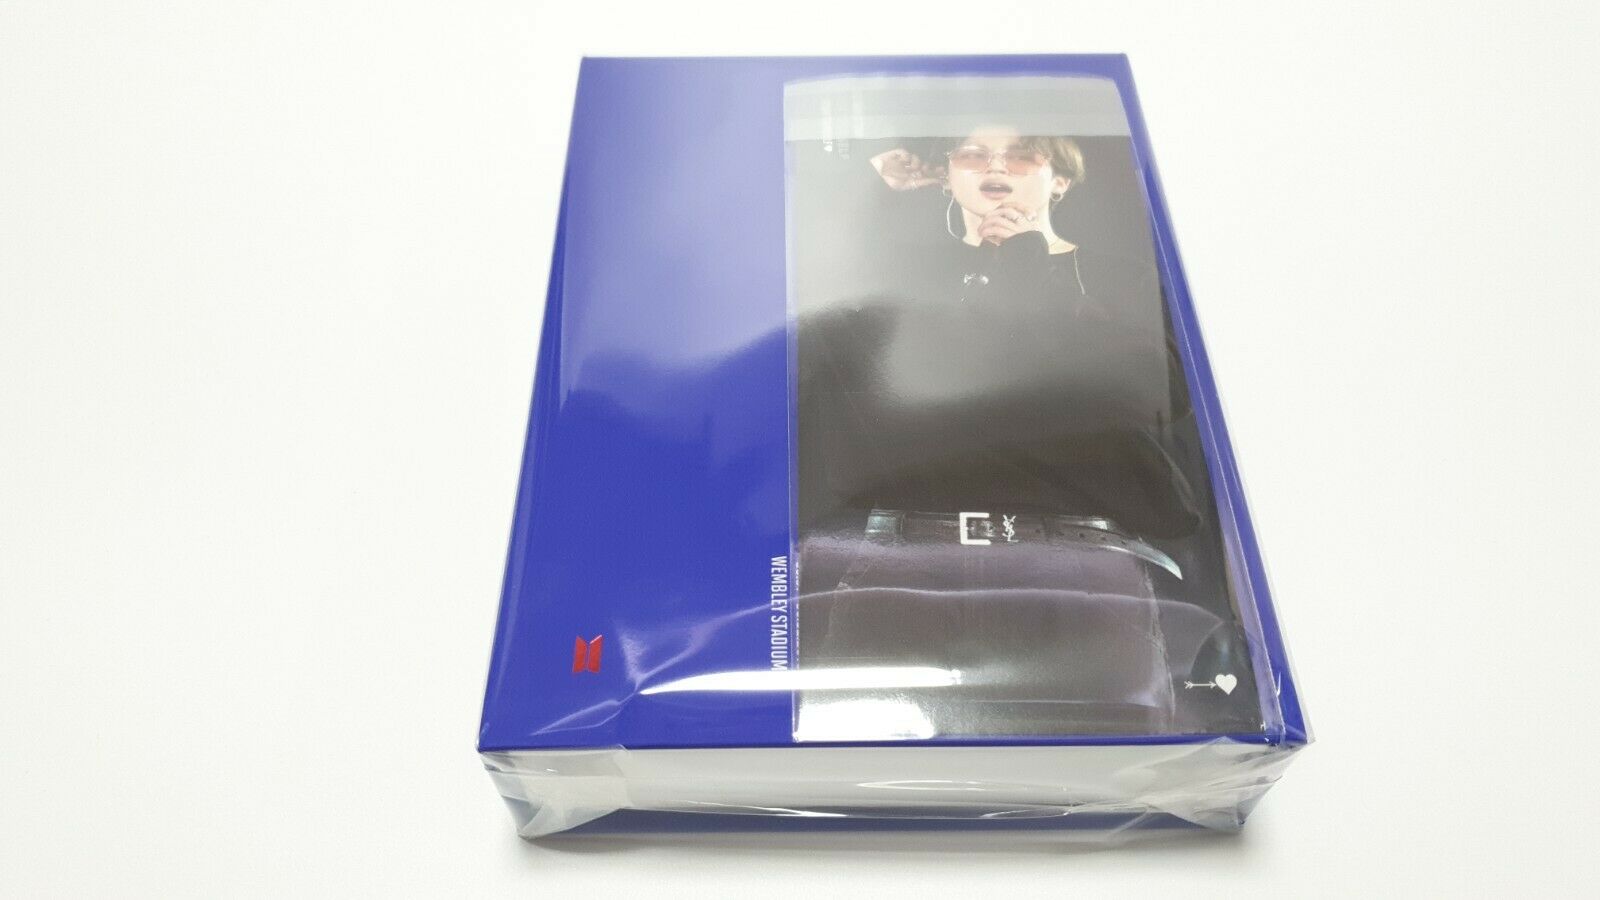 Bts Speak Your Self London Dvd Full Package With Dhl (jimin Book Mark)